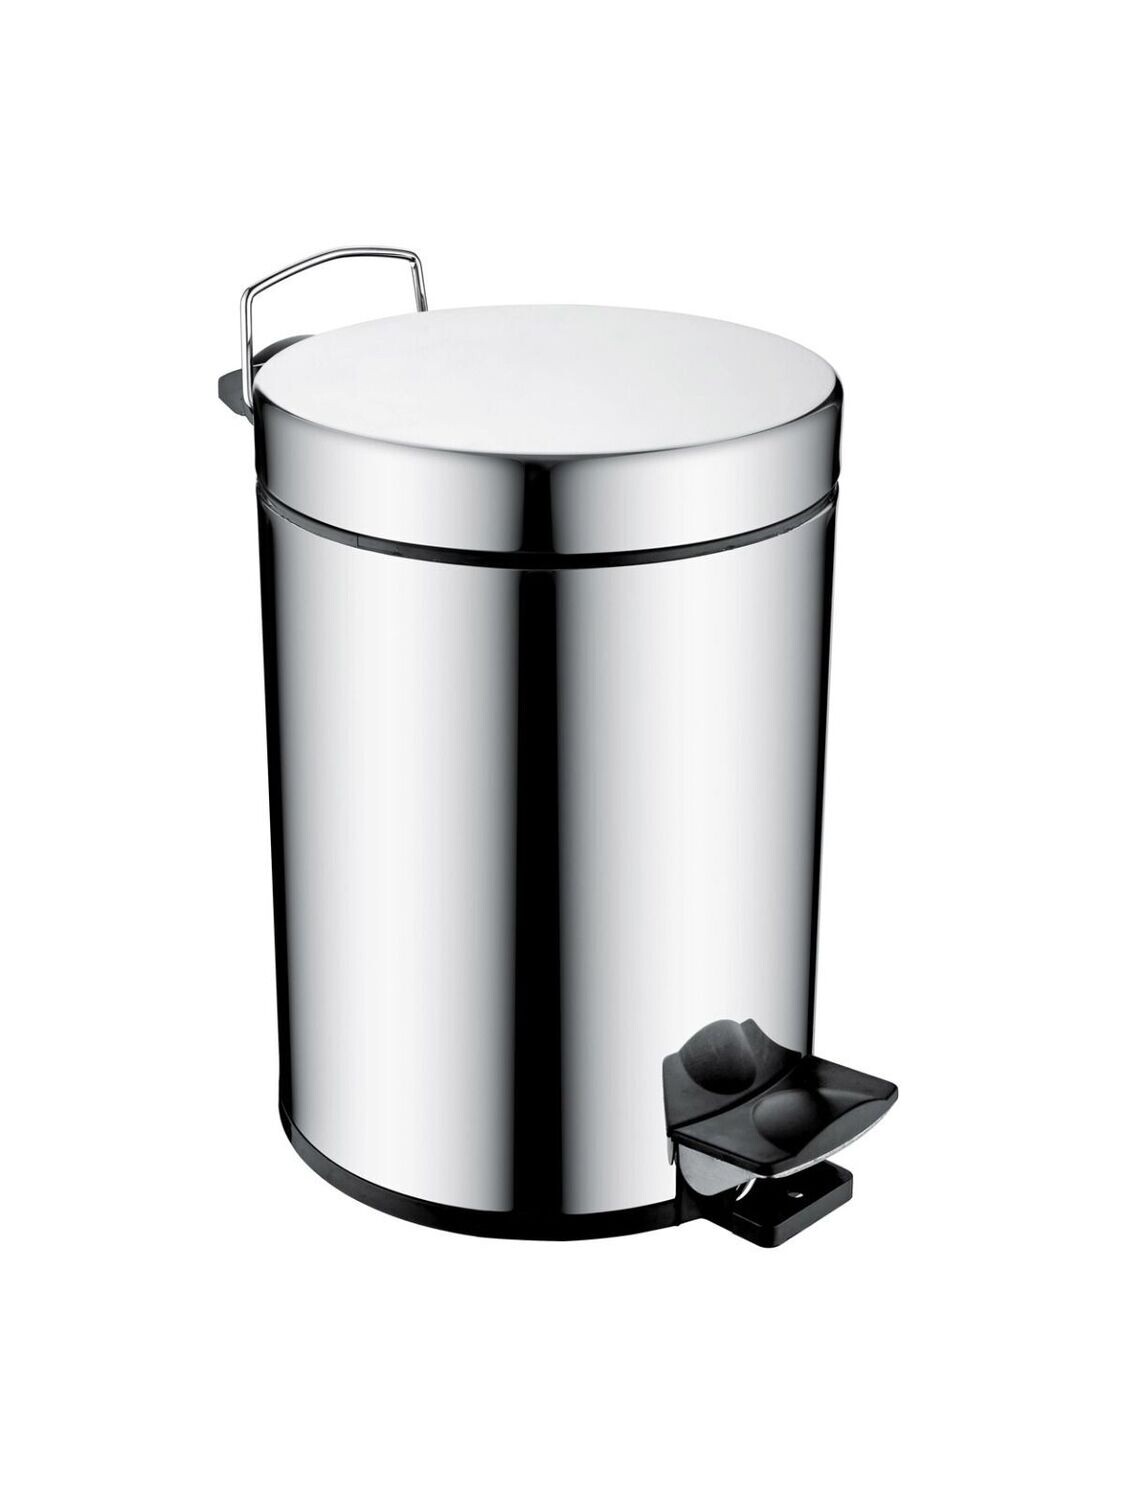 Bon appetit 5L stainless steel Pedal bin Chrome 5L Bathroom, Bedroom, Office, Mini Garbage can with Foot Pedal for Small Space,